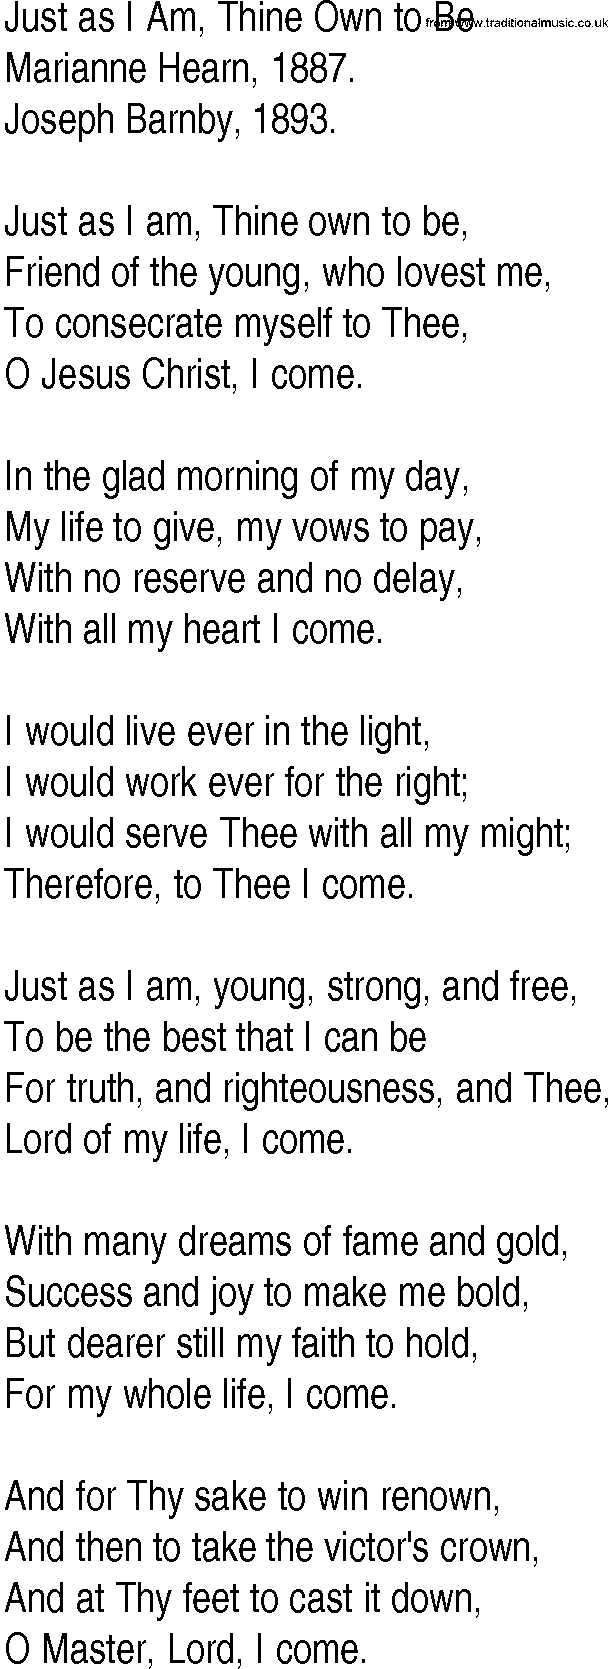 Hymn and Gospel Song: Just as I Am, Thine Own to Be by Marianne Hearn lyrics